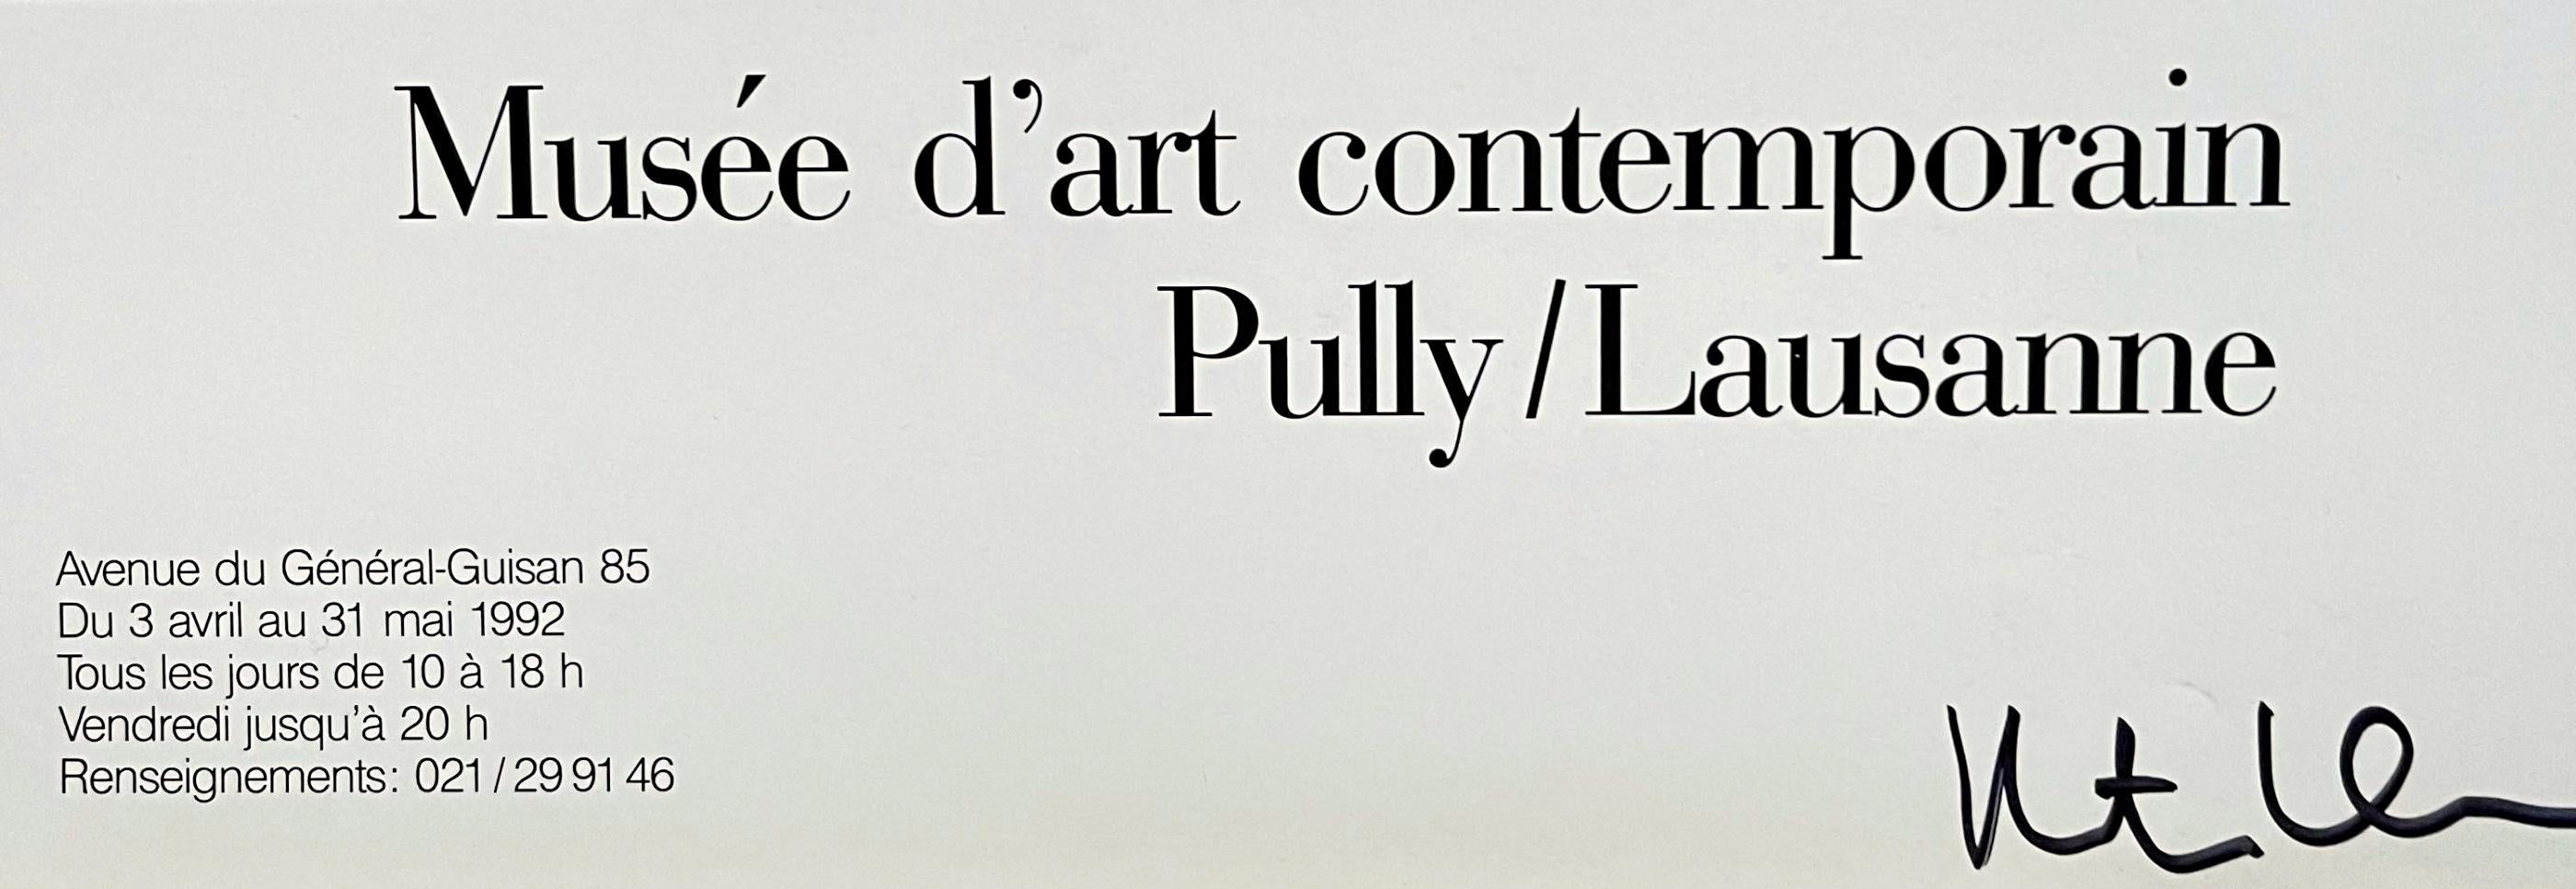 Musee d'Art Contemporain Pully/Lausanne (Hand Signed) - Print by Peter Halley